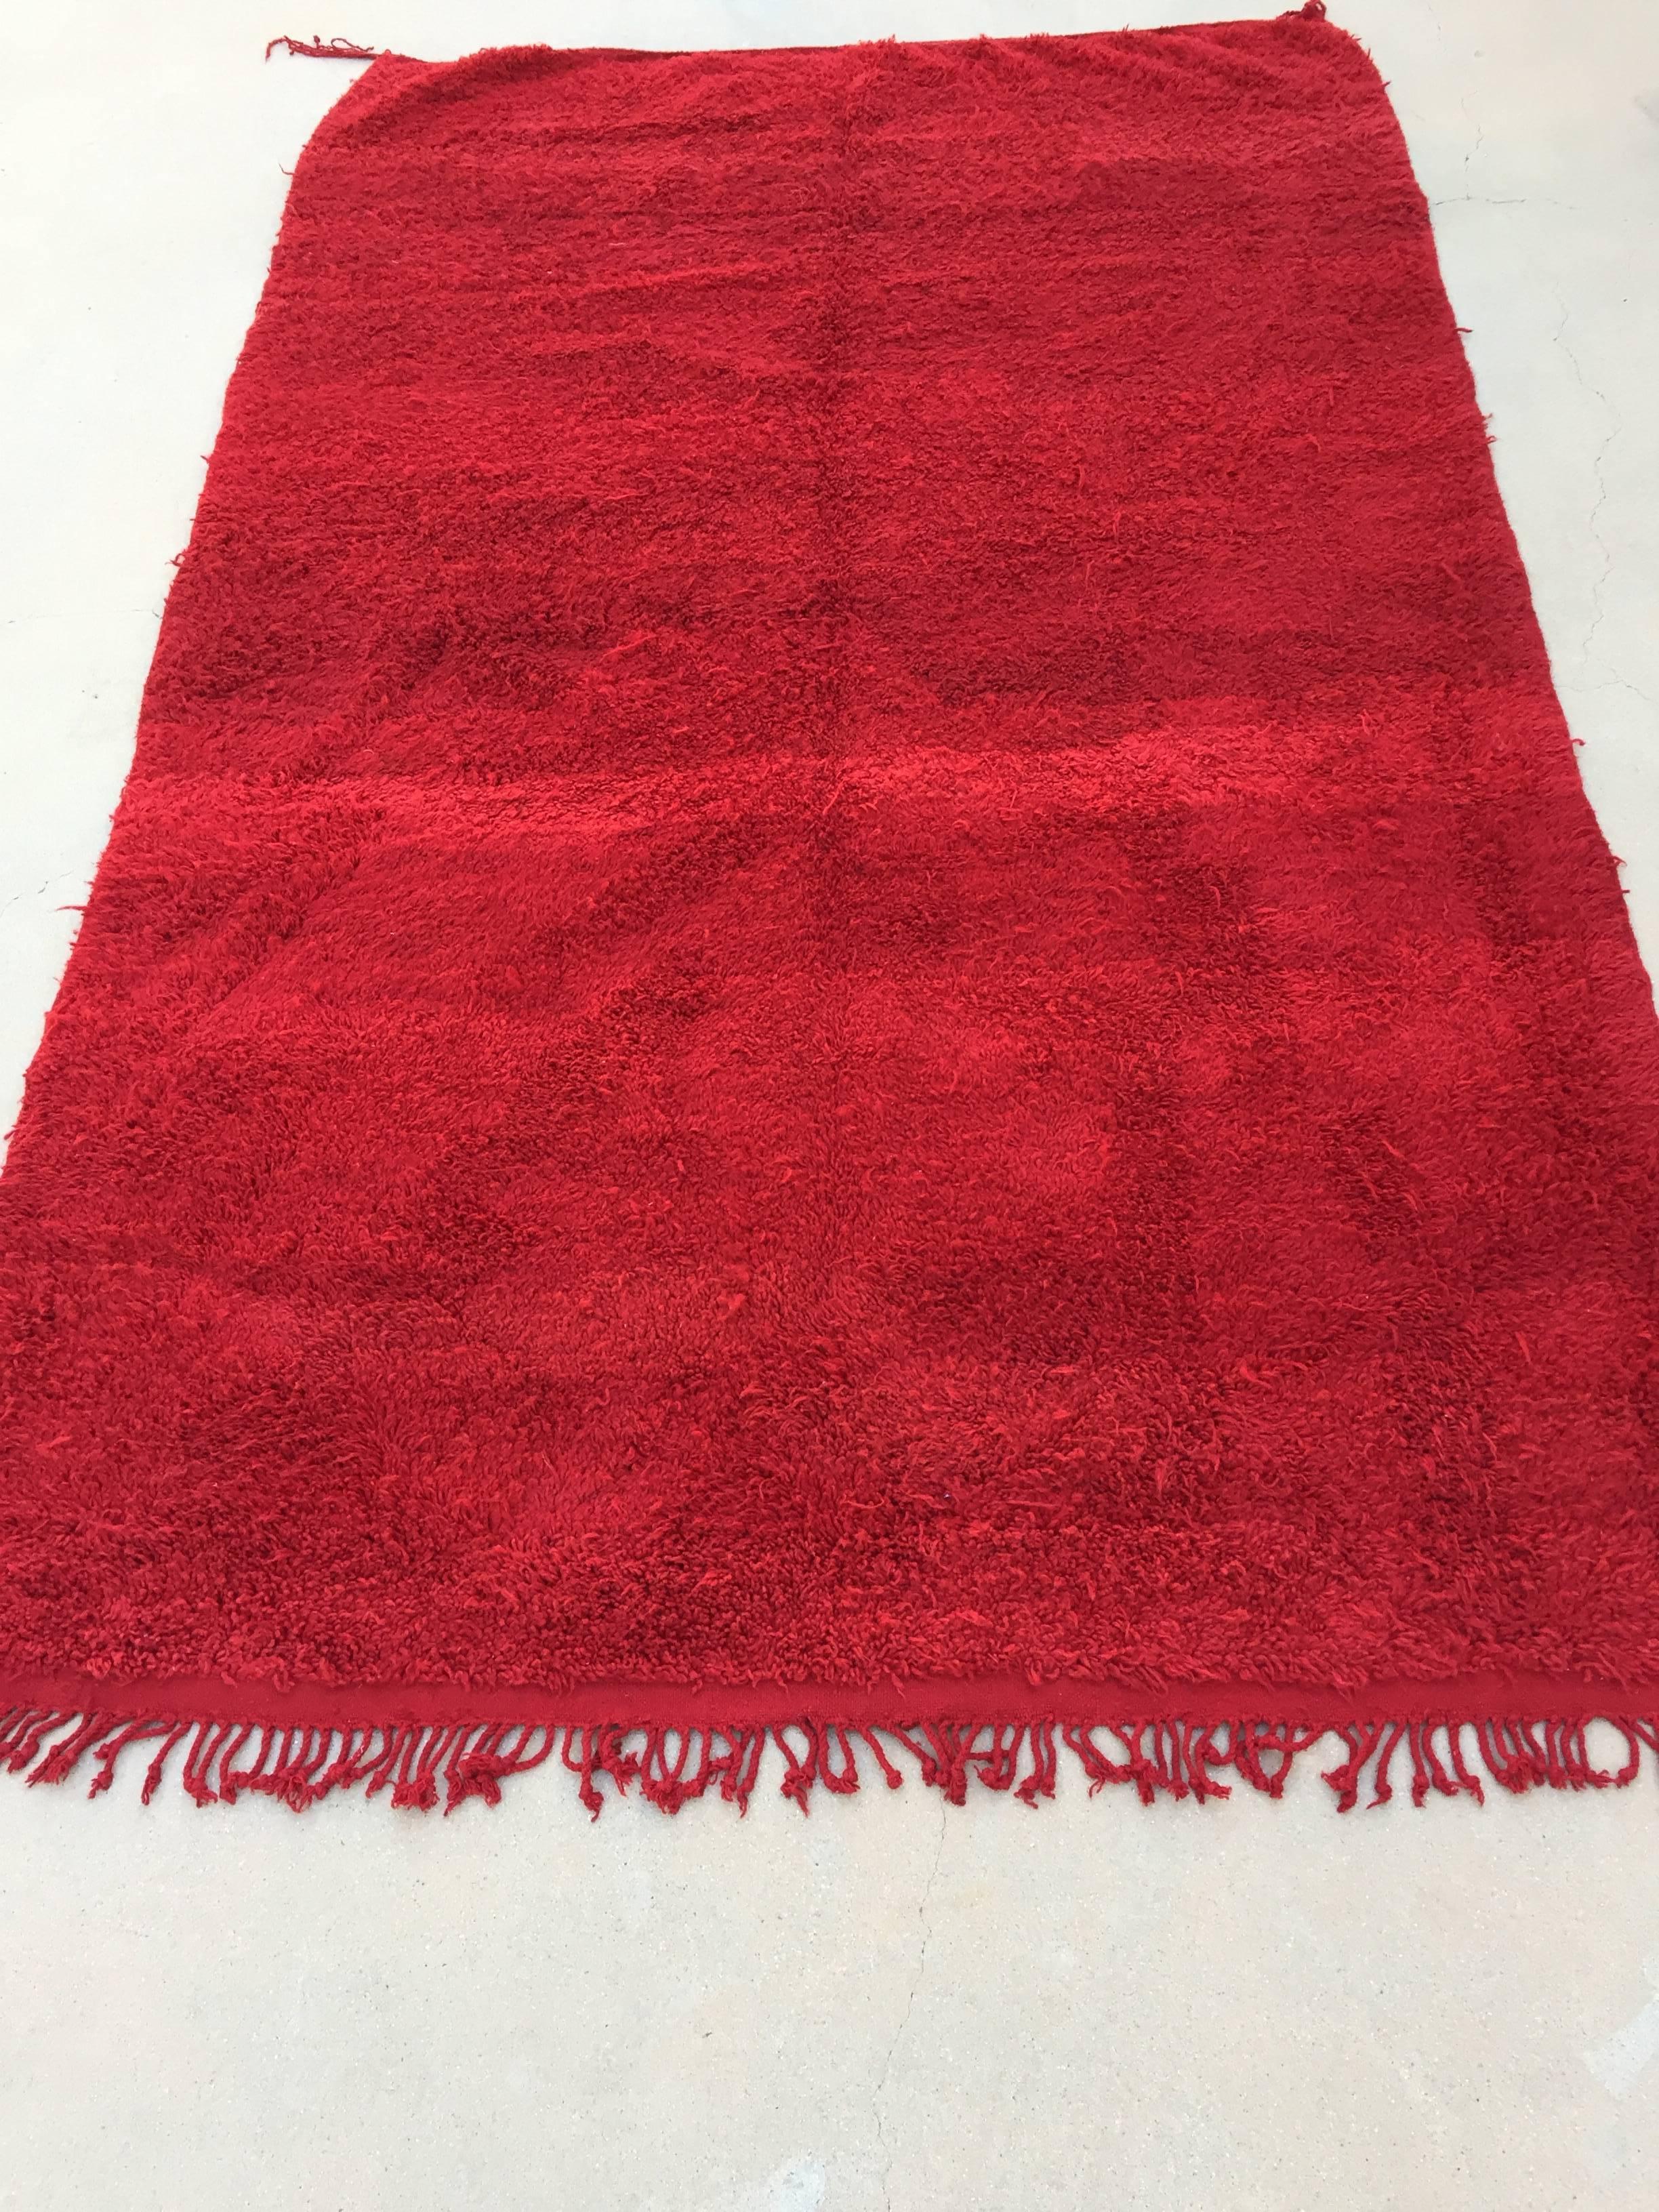 Vintage red tribal Moroccan Berber rug from the Middle Atlas mountains. Monochromatic red rug with variations in color intensity typical for this tribe.
This is a good example with high quality handwoven wool.
Soft and shaggy tribal Bohemian